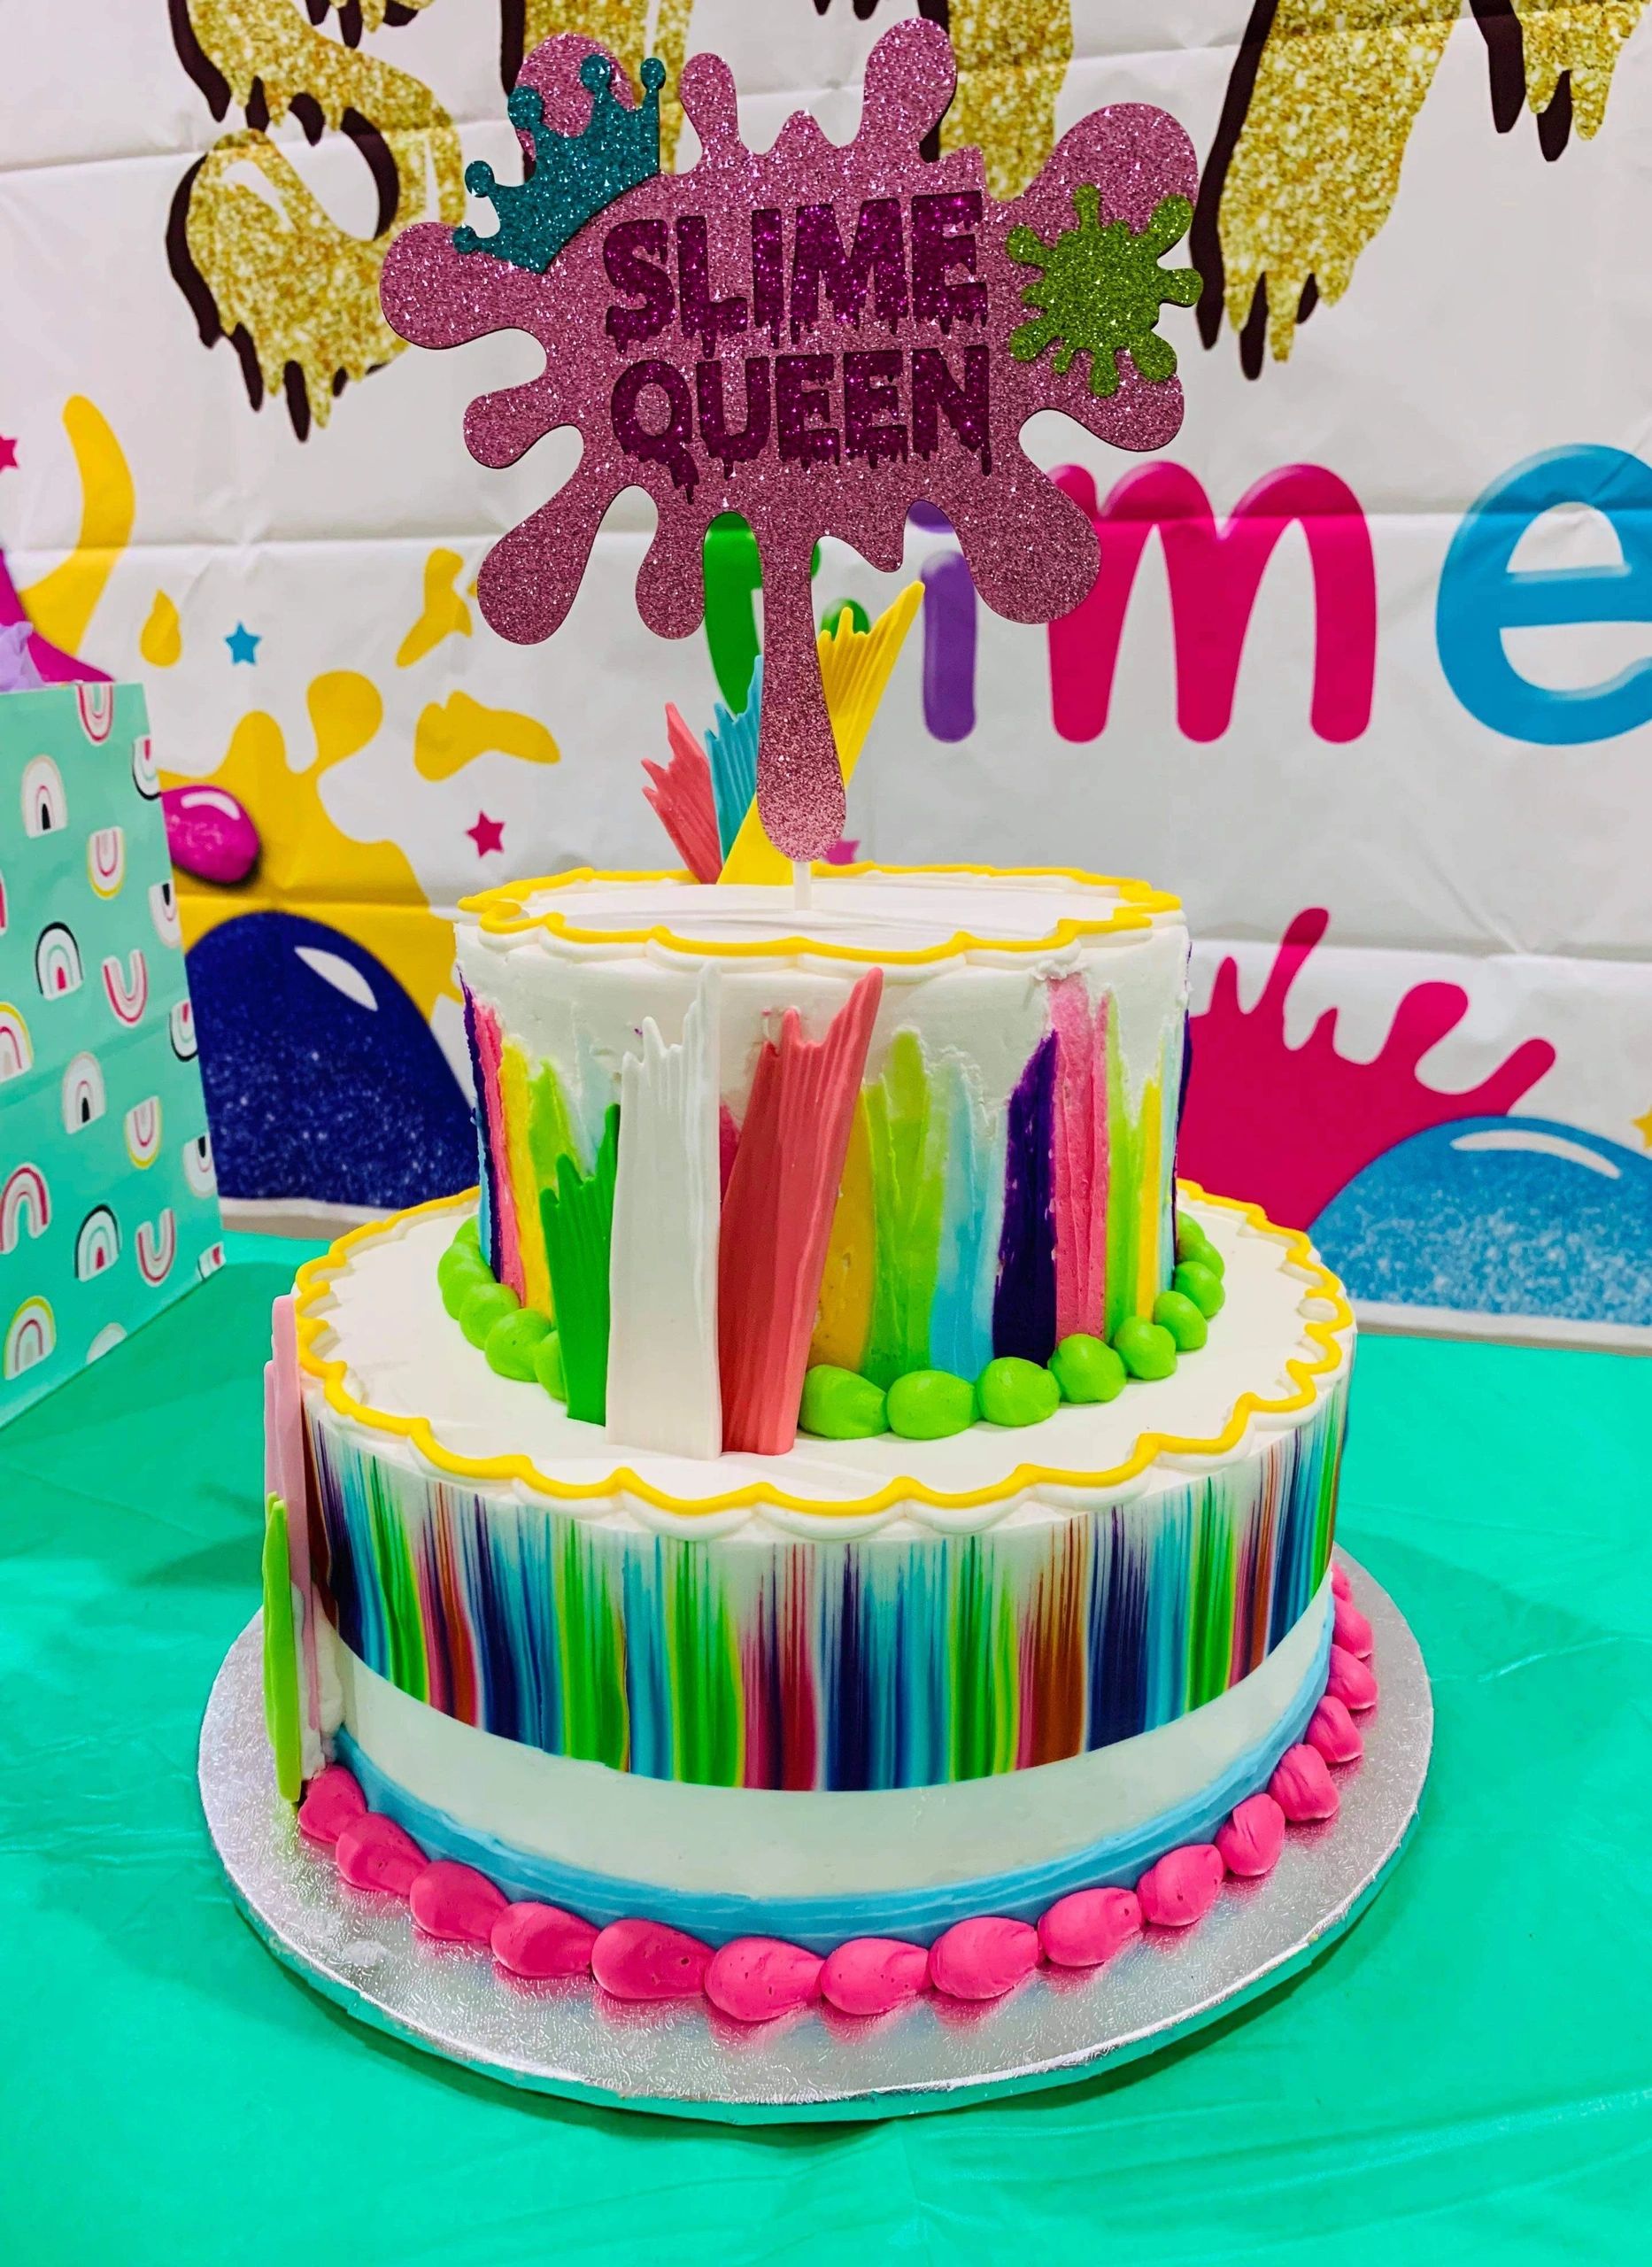 Slime Cake Topper / Slime Queen Cake Topper / Slime Party / Slime Birthday  Decorations / Slime Decorations / Slime Party Supplies 